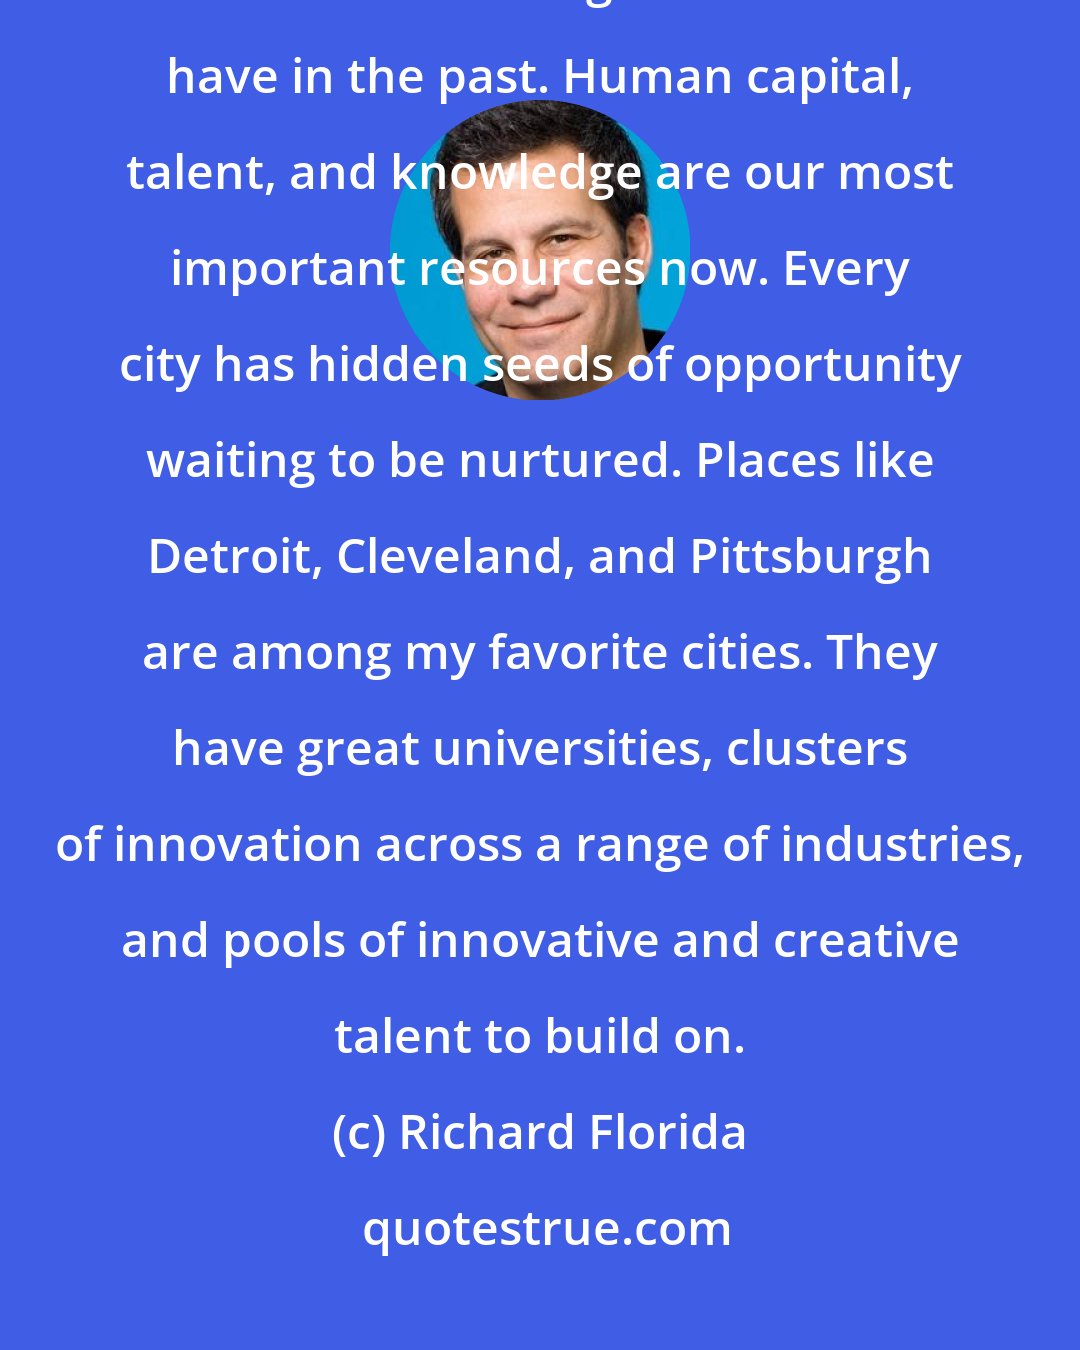 Richard Florida: We have to acknowledge that we can't look to manufacturing or natural resources to drive growth like we have in the past. Human capital, talent, and knowledge are our most important resources now. Every city has hidden seeds of opportunity waiting to be nurtured. Places like Detroit, Cleveland, and Pittsburgh are among my favorite cities. They have great universities, clusters of innovation across a range of industries, and pools of innovative and creative talent to build on.